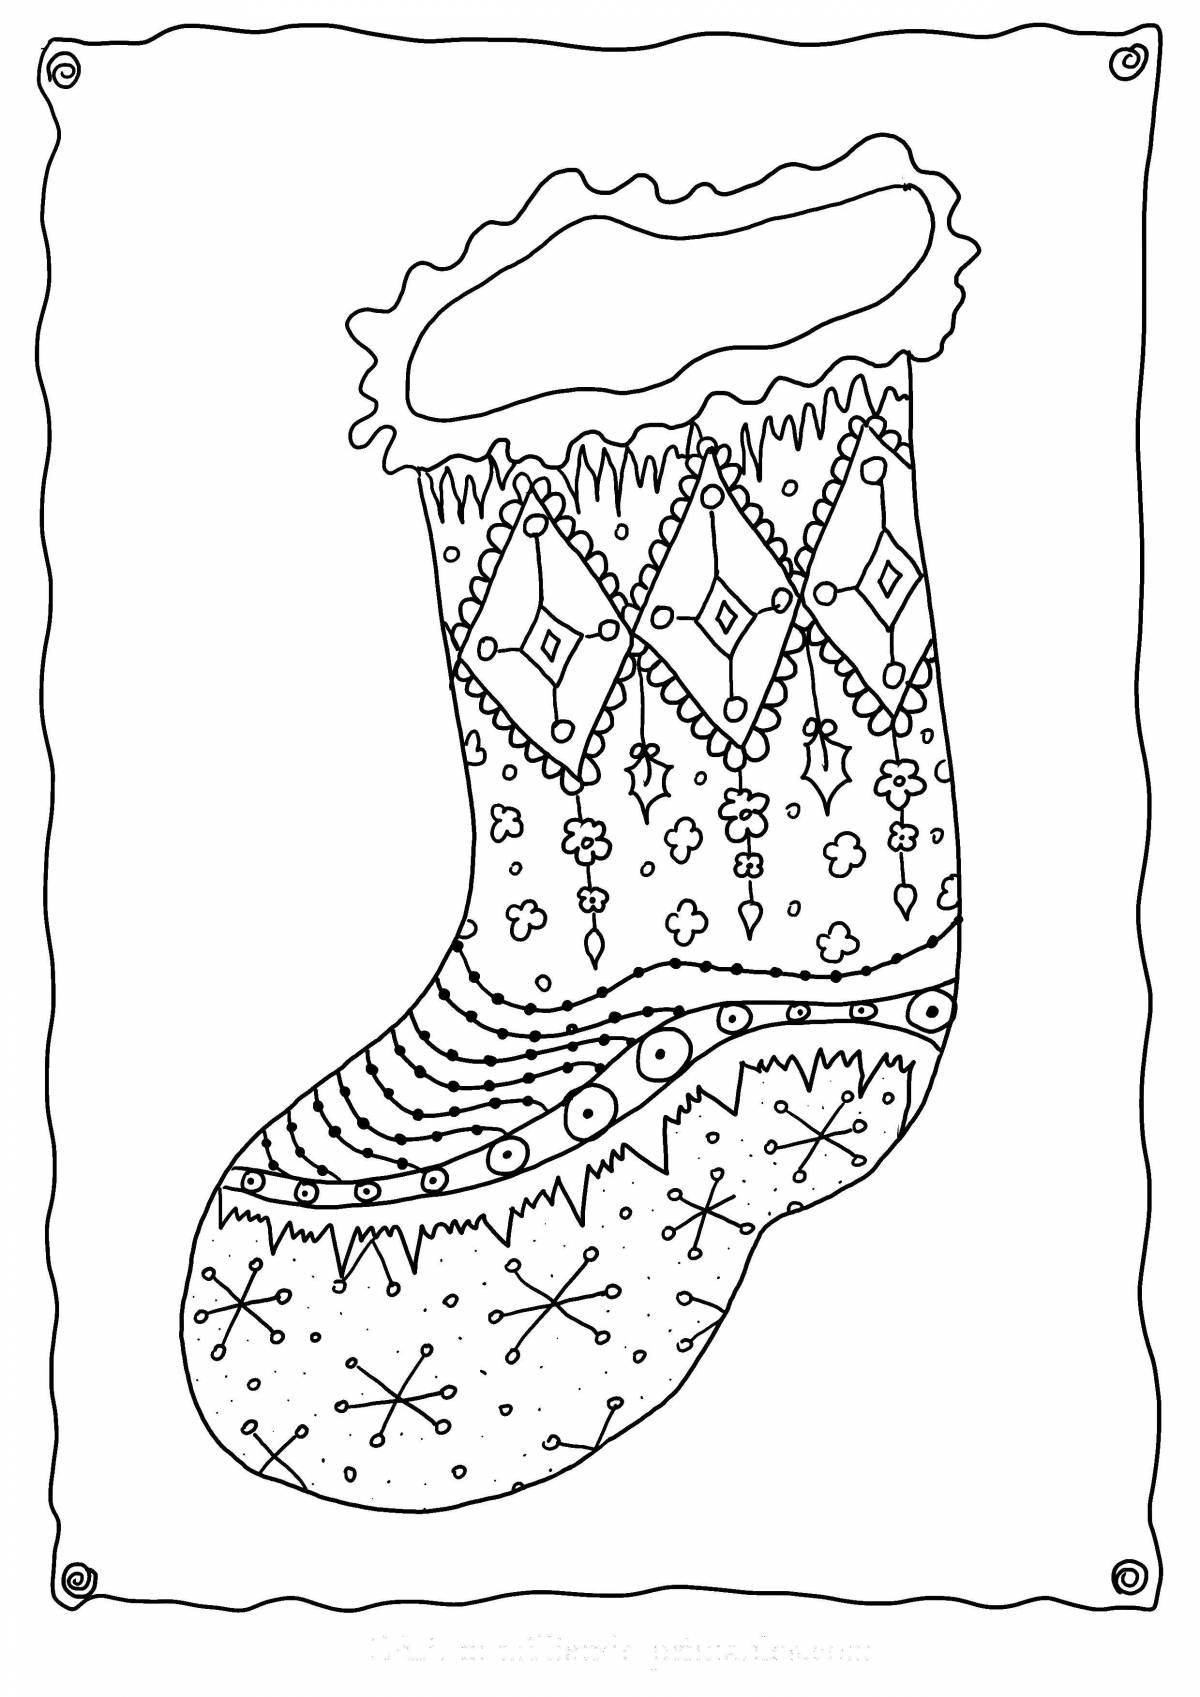 Coloring book exciting socks